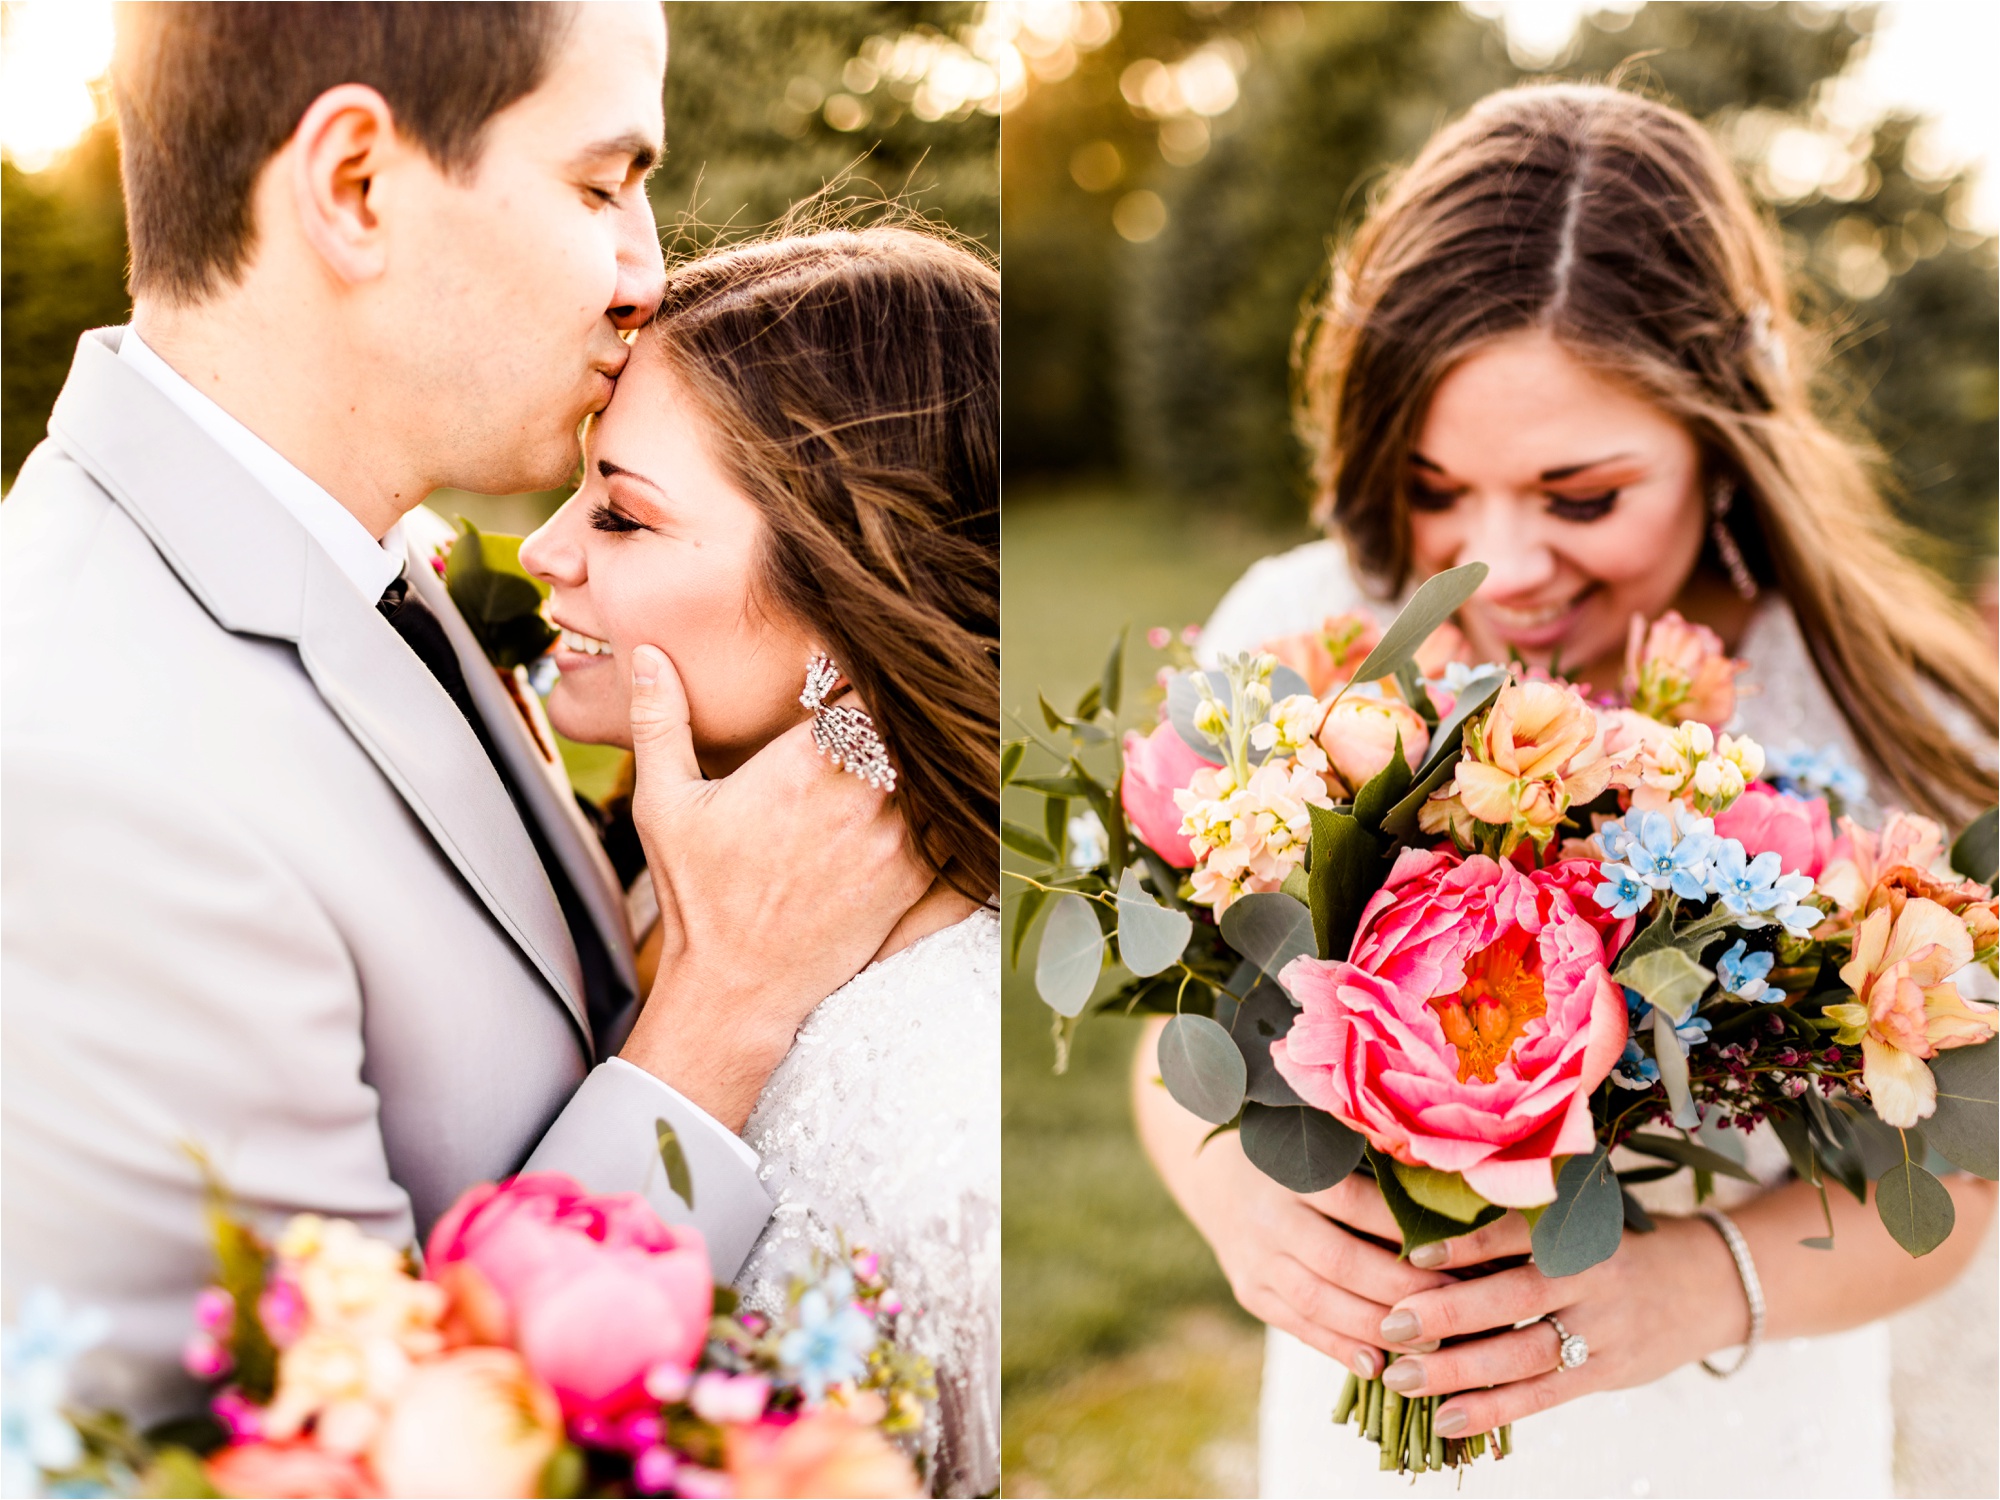 Caitlin and Luke Photography, Illinois Wedding Photographers, Champaign Wedding Photographers, Bloomington Normal Wedding Photographers, Romantic Red and Pink Sunset Styled Shoot_9587.jpg